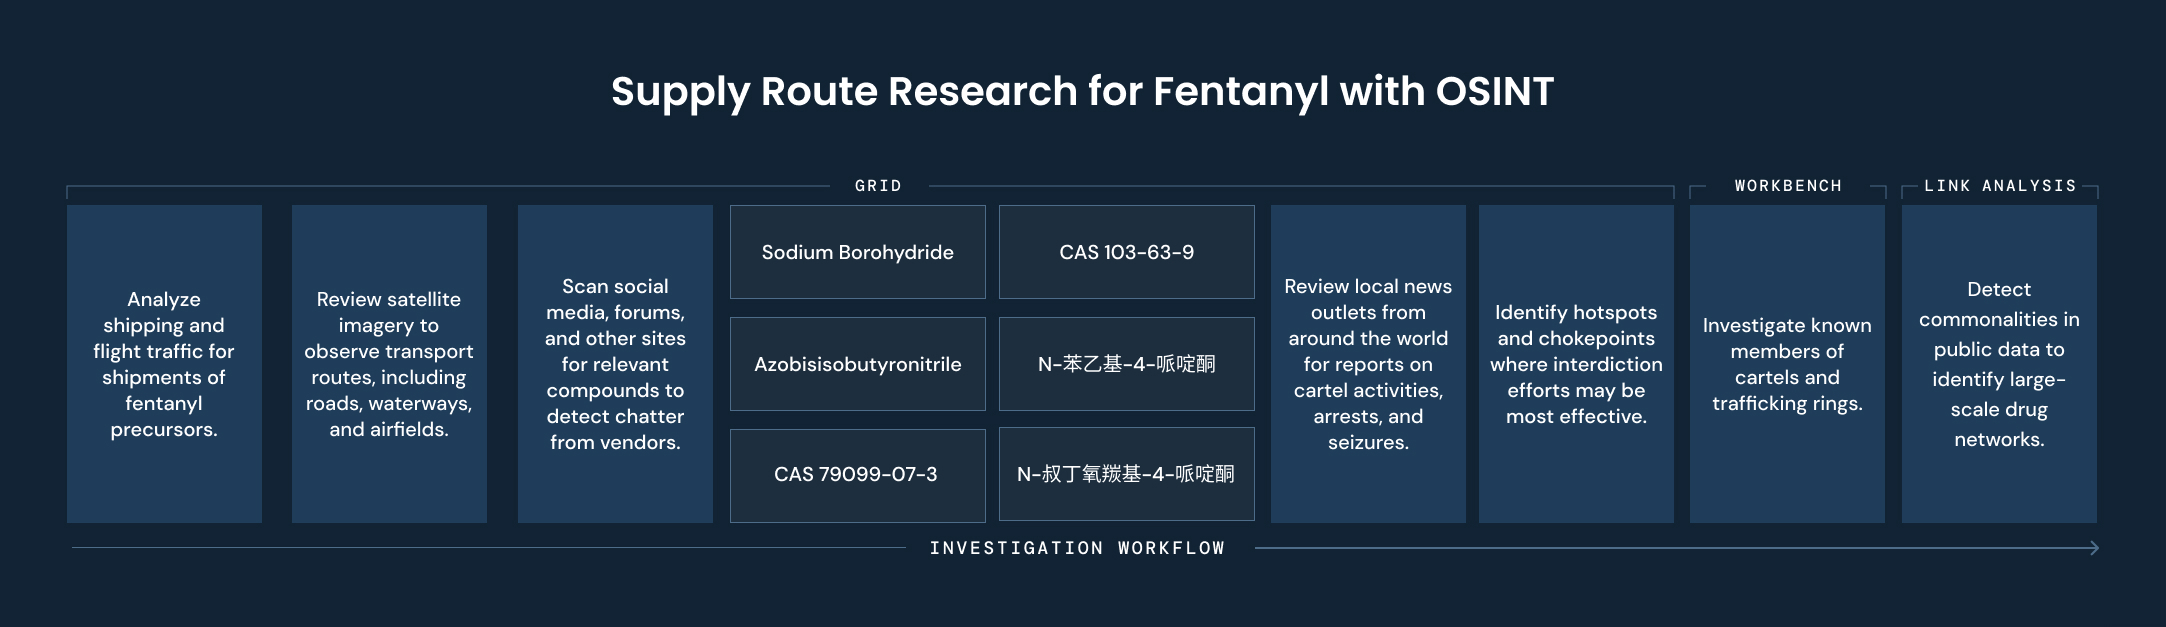 Supply Route Research for Fentanyl